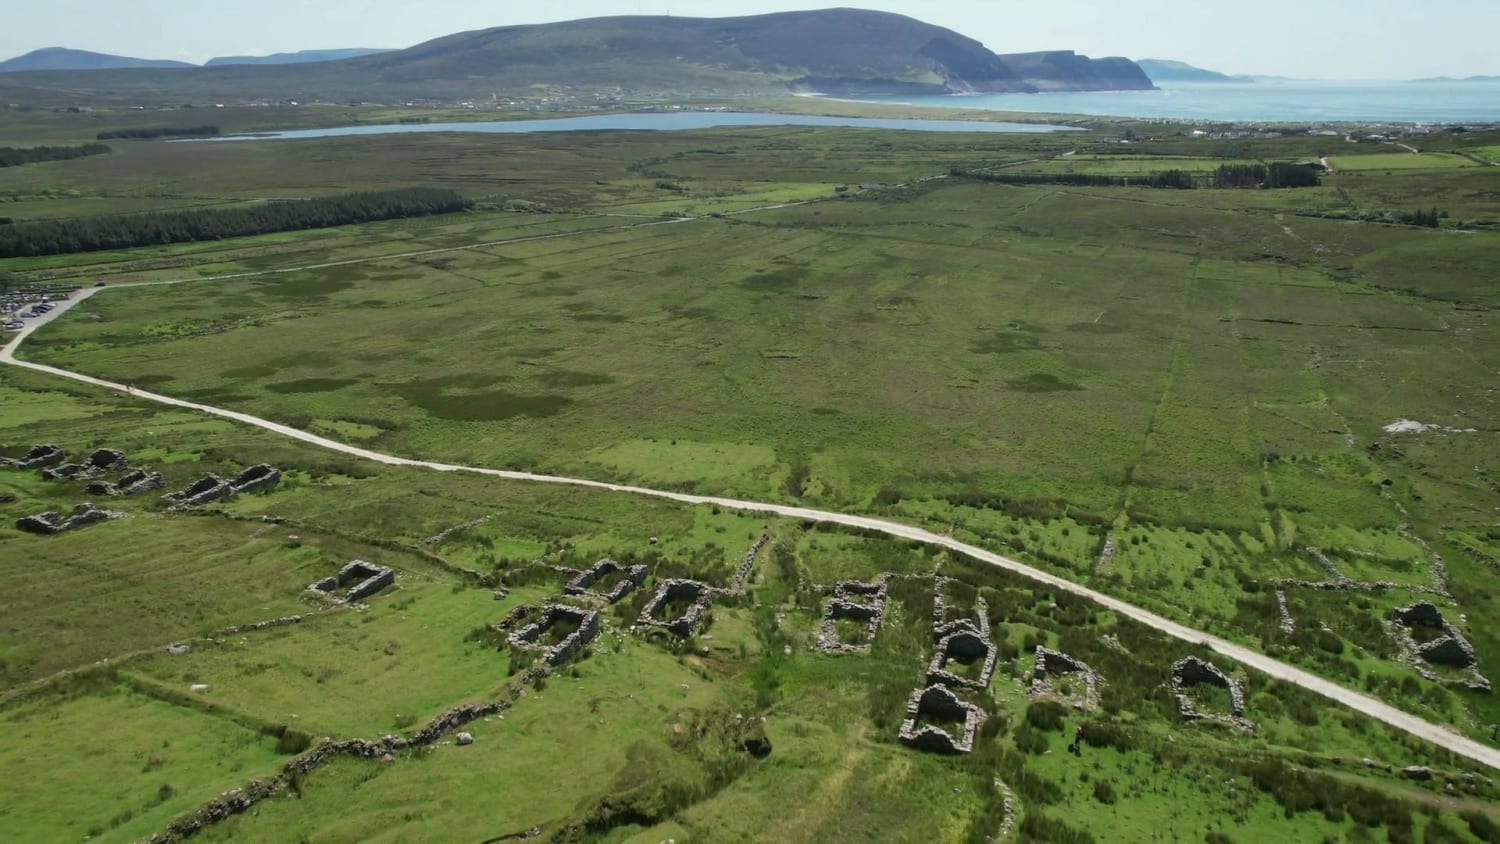 Abandoned Village, Achill Island, Ireland (video in comments)